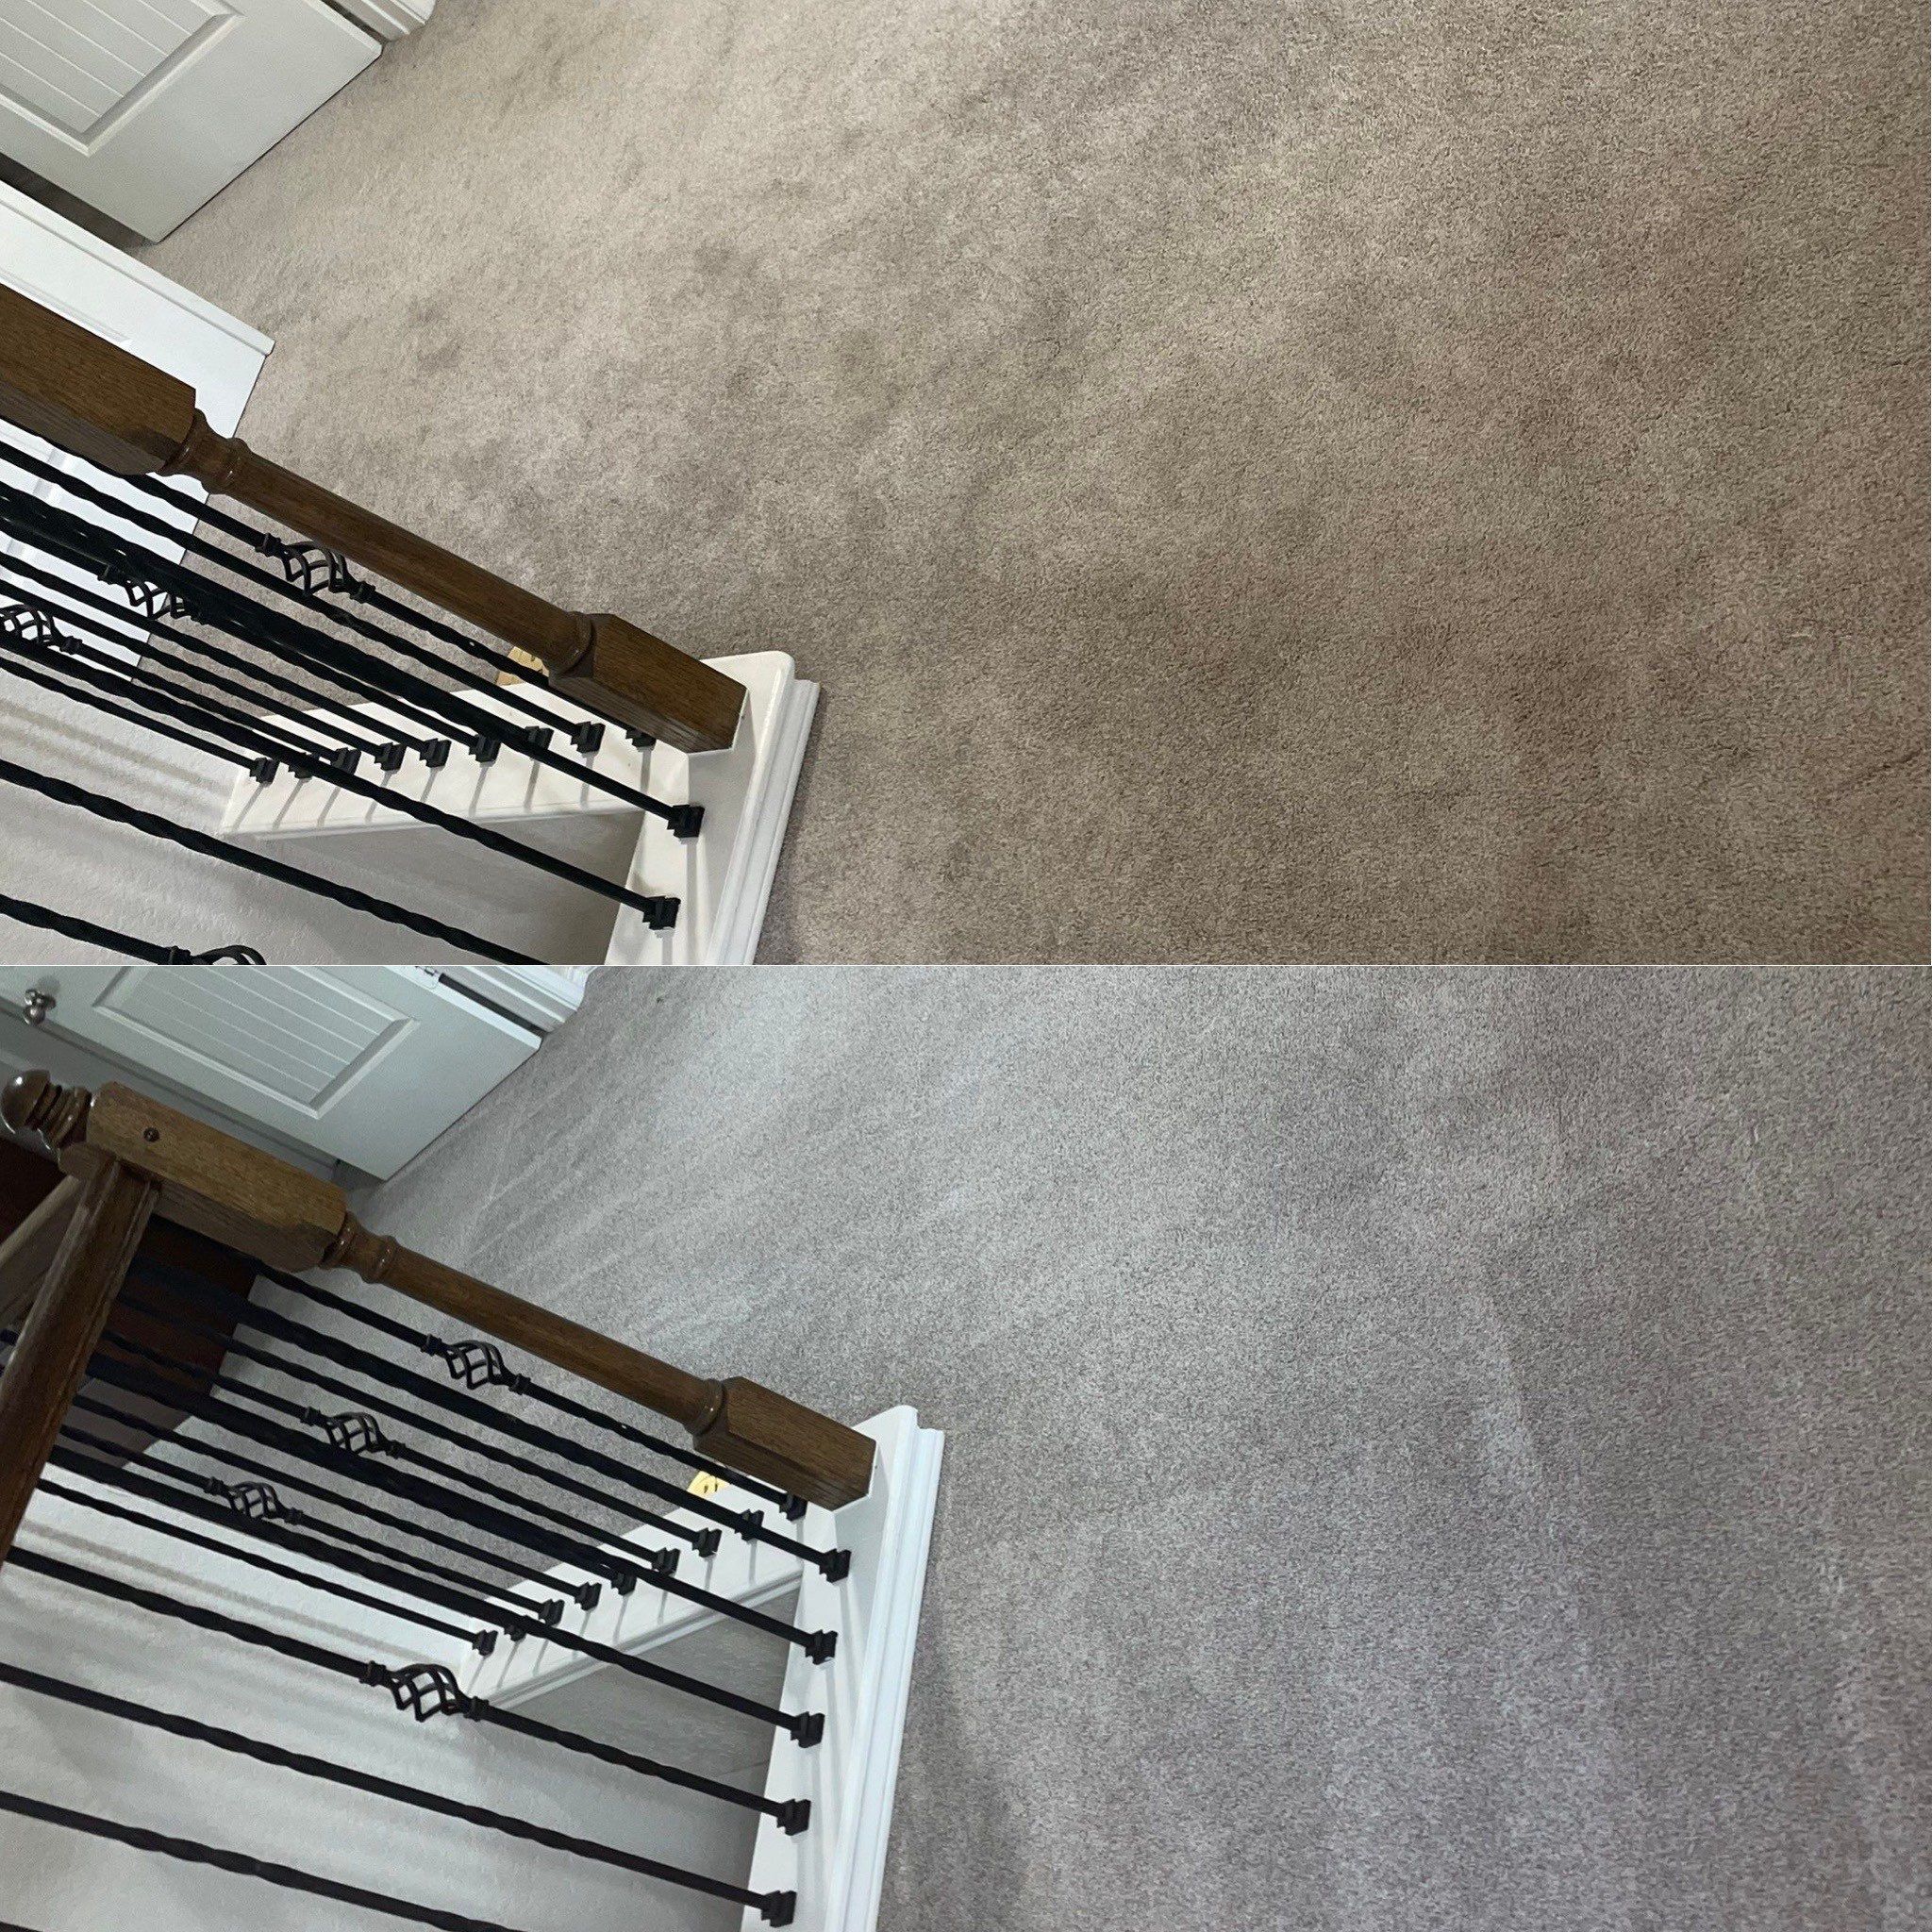 cleaning and refreshing carpeted floor sections in a residential staircase landing area